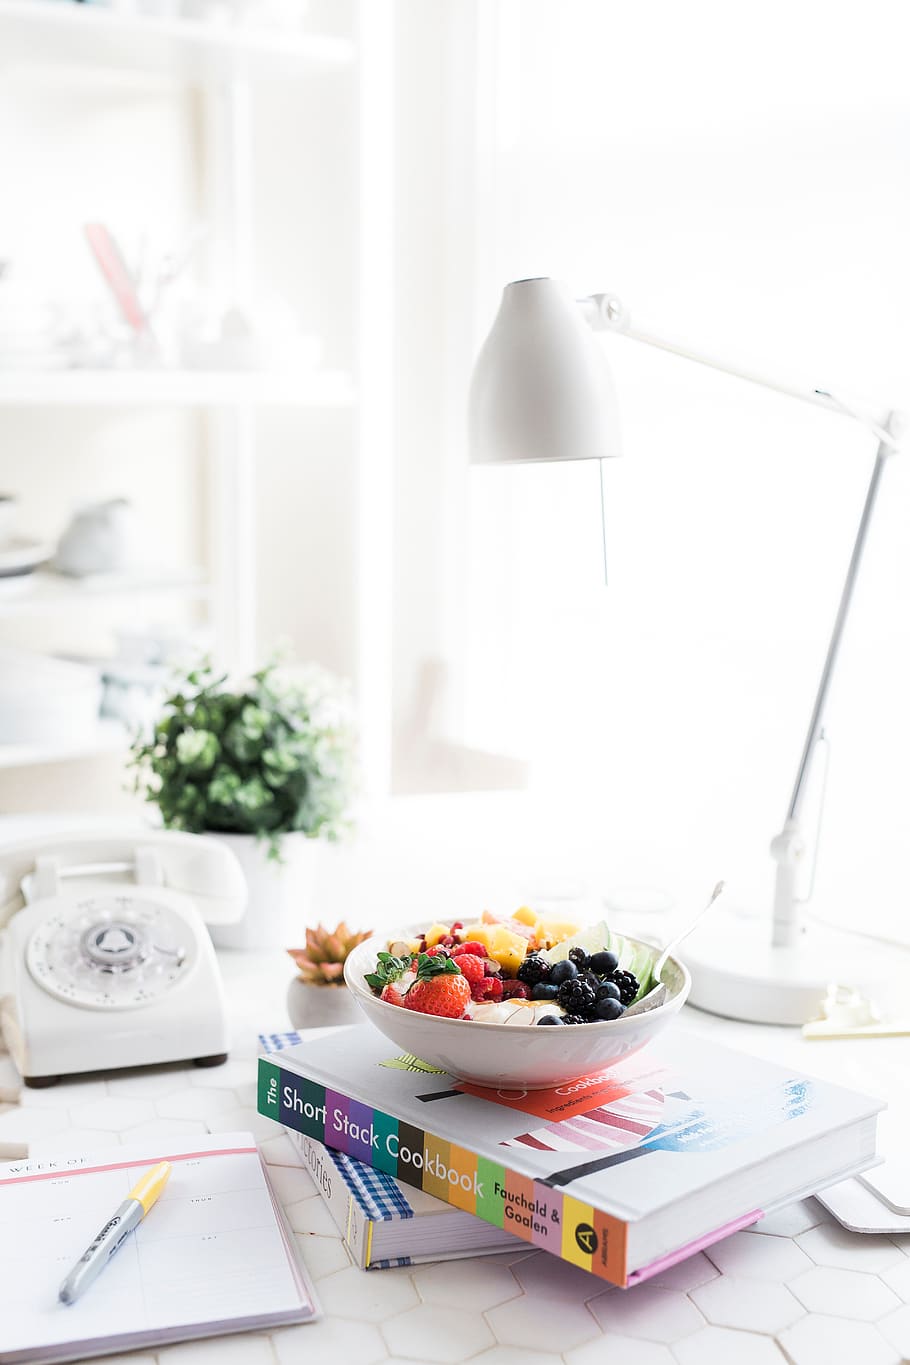 fruits, food, dessert, sweets, book, notebook, pen, table, white, lamp